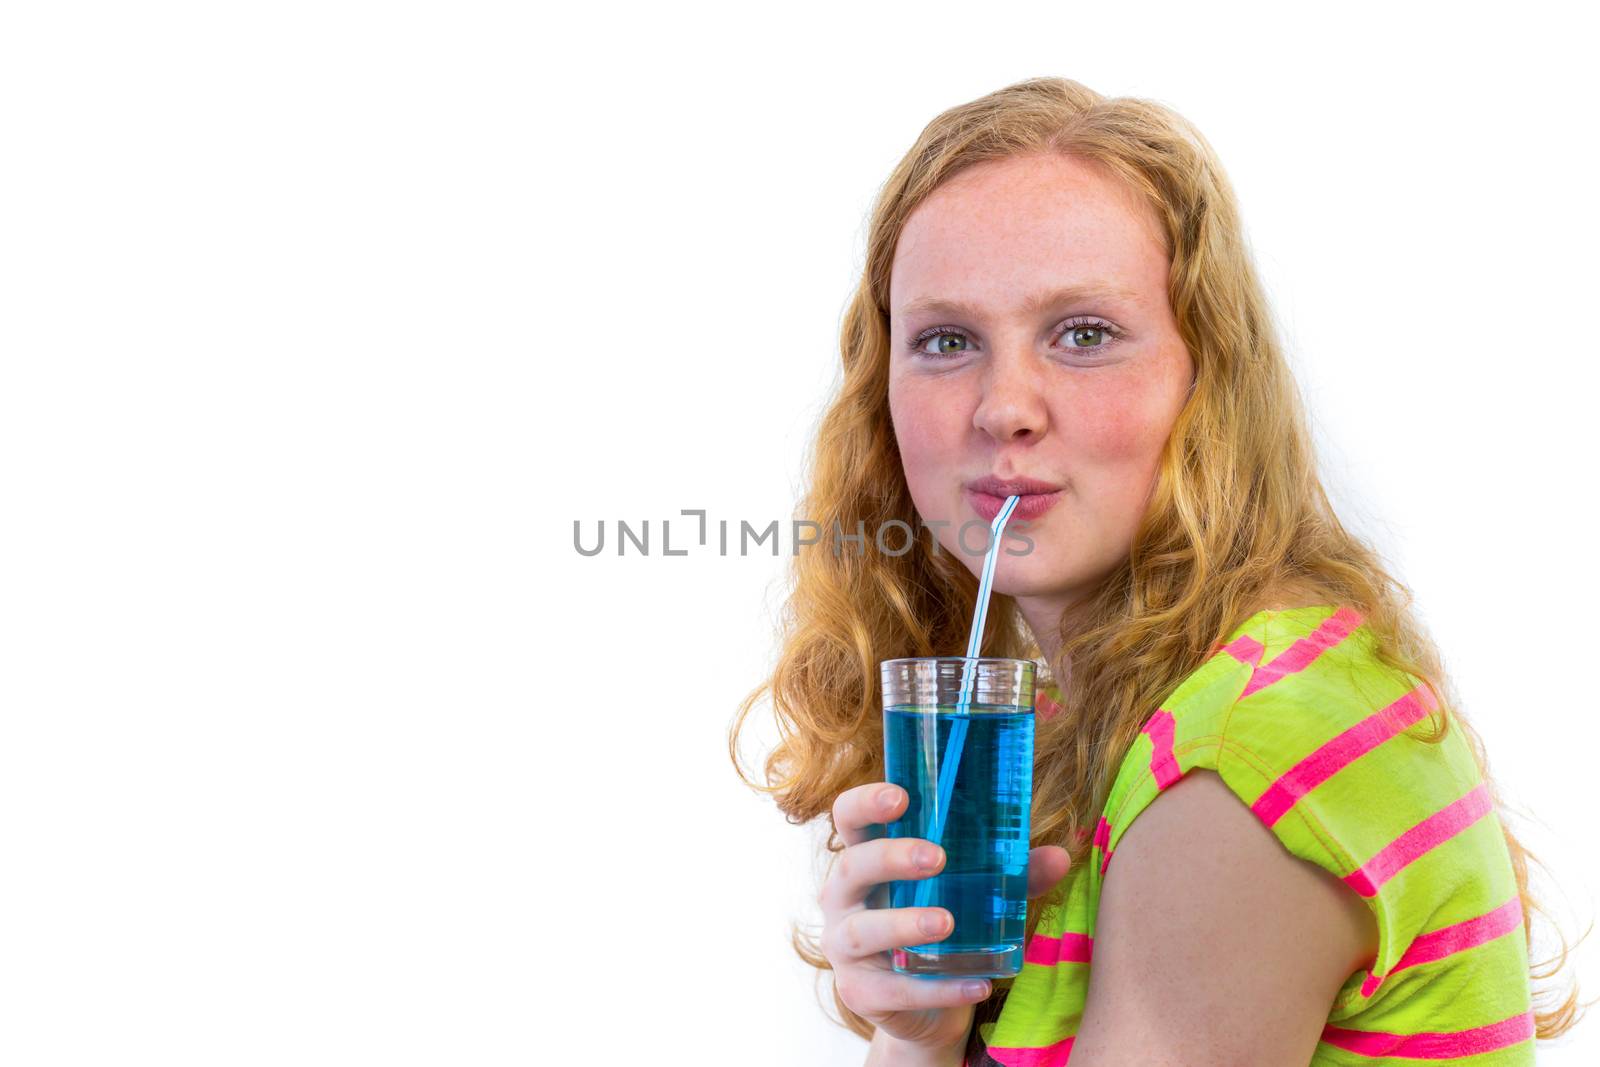 Dutch redhead teenage girl drinking blue soda with straw isolated on white background